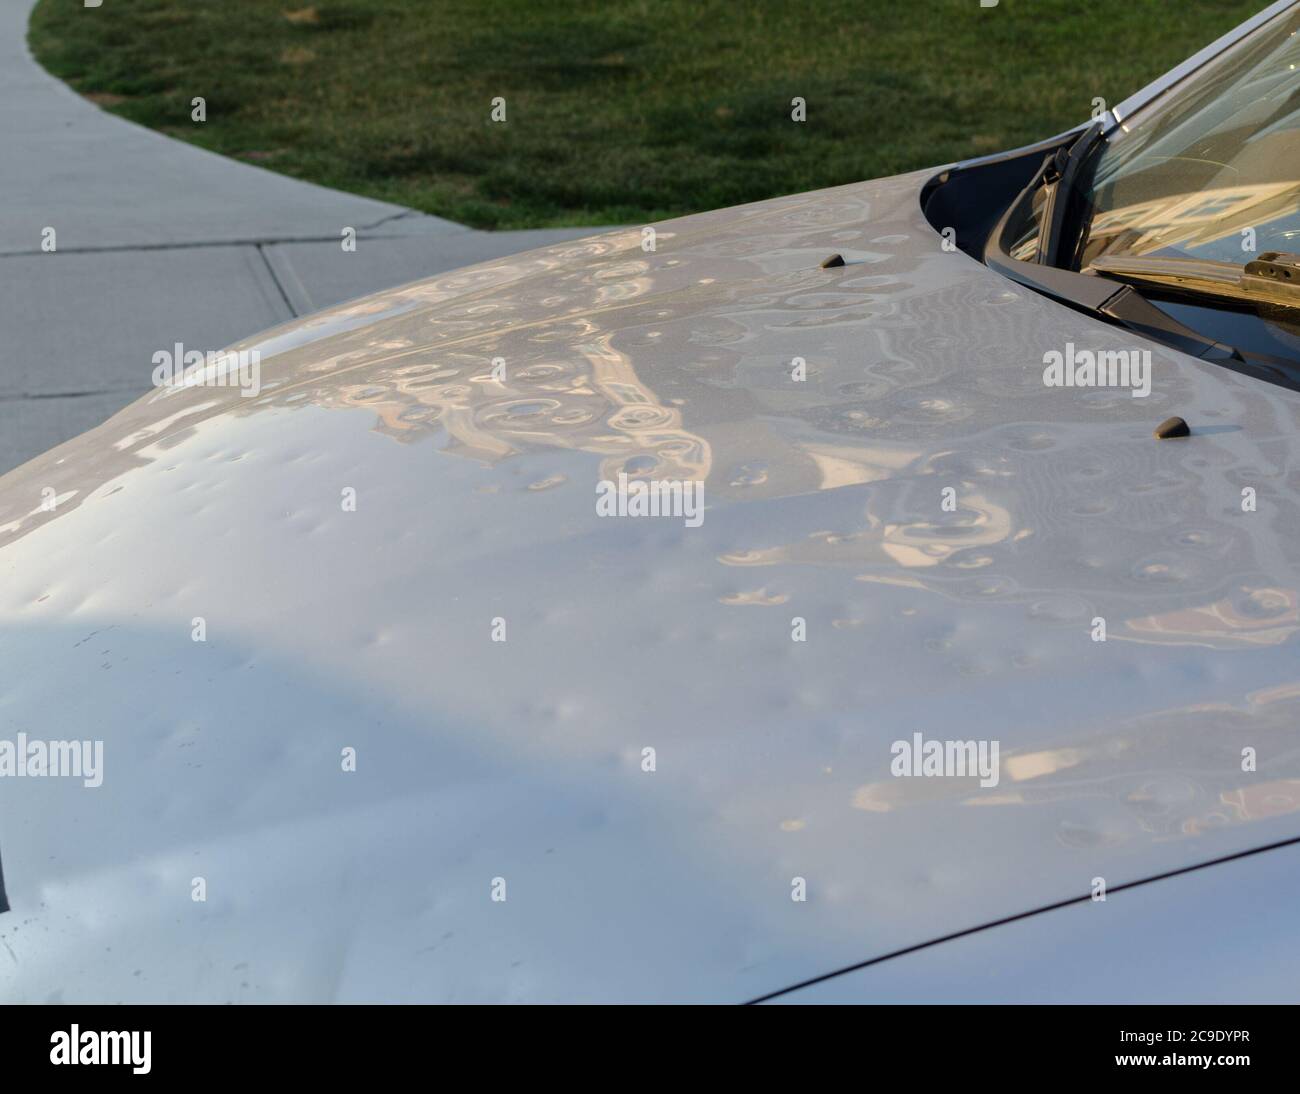 Many residents will be filing automobile insurance claims after an extreme hail event in NE Calgary on June 13, 2020. Stock Photo